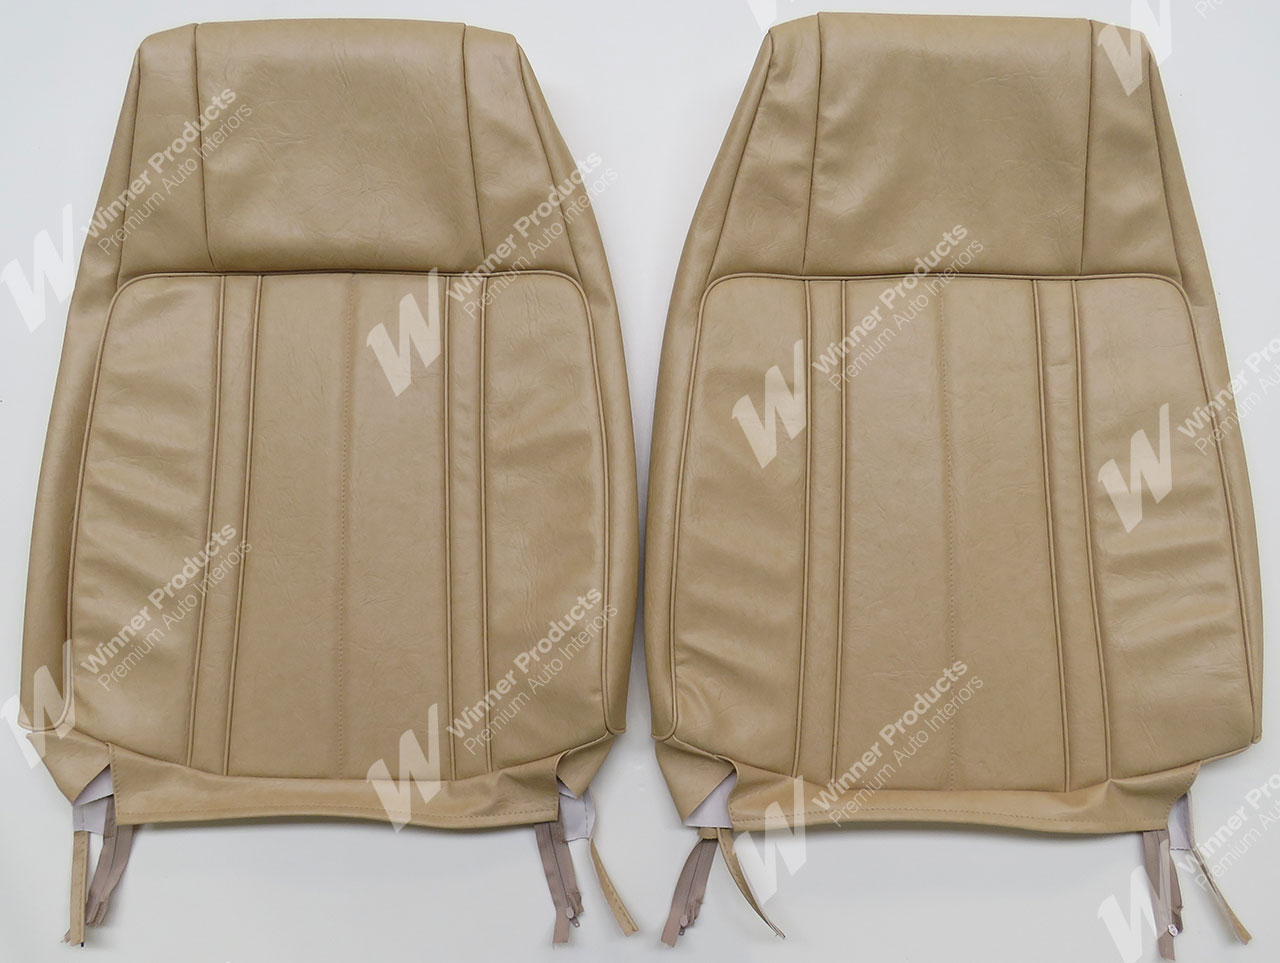 Ford GT XB GT Sedan C Chamois Seat Covers (Image 2 of 5)